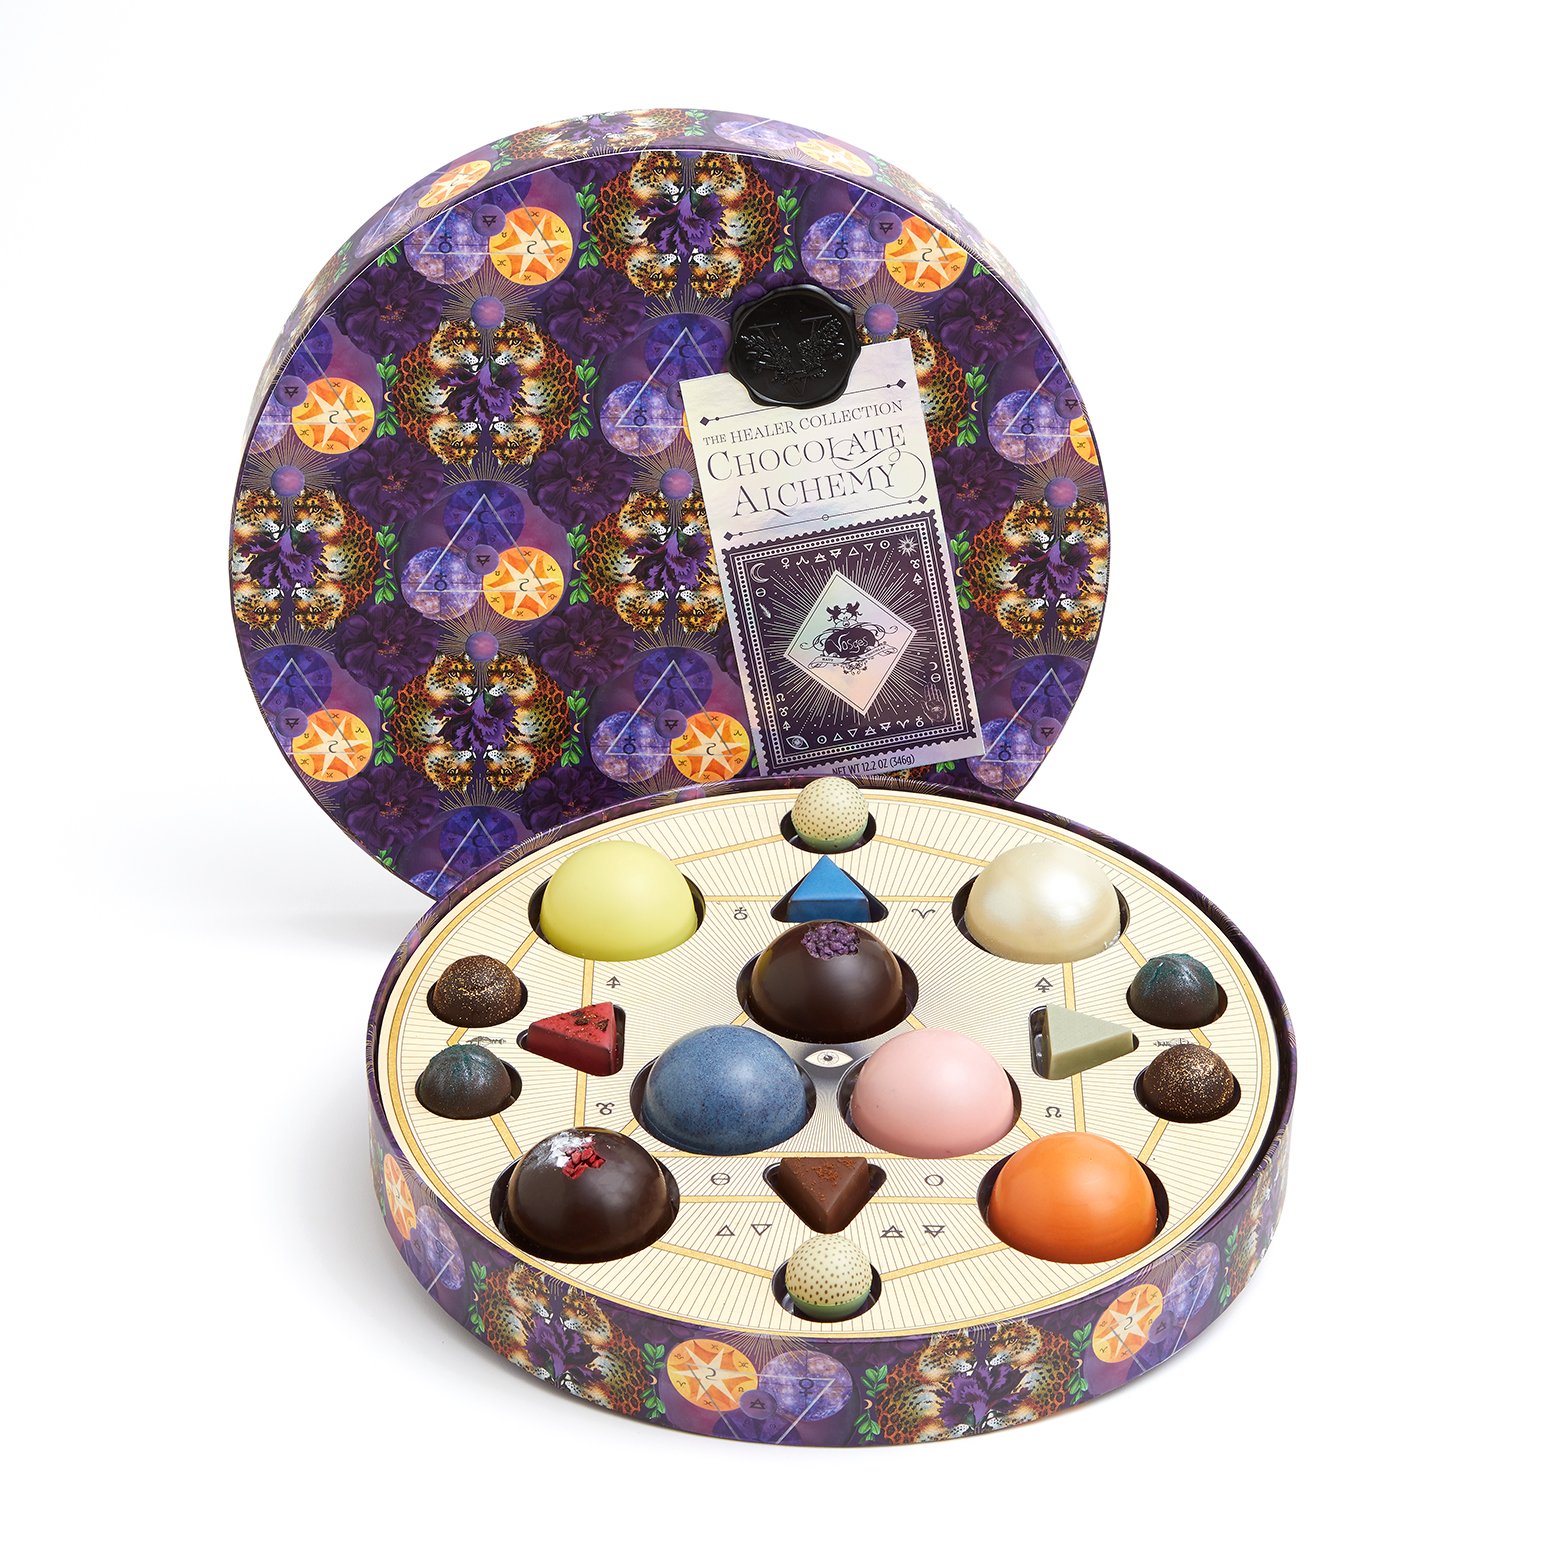 Our top 10 gifts for women in 2020: Vosges chocolate alchemy truffles gift box | Small Business Holiday Gift Guide 2020